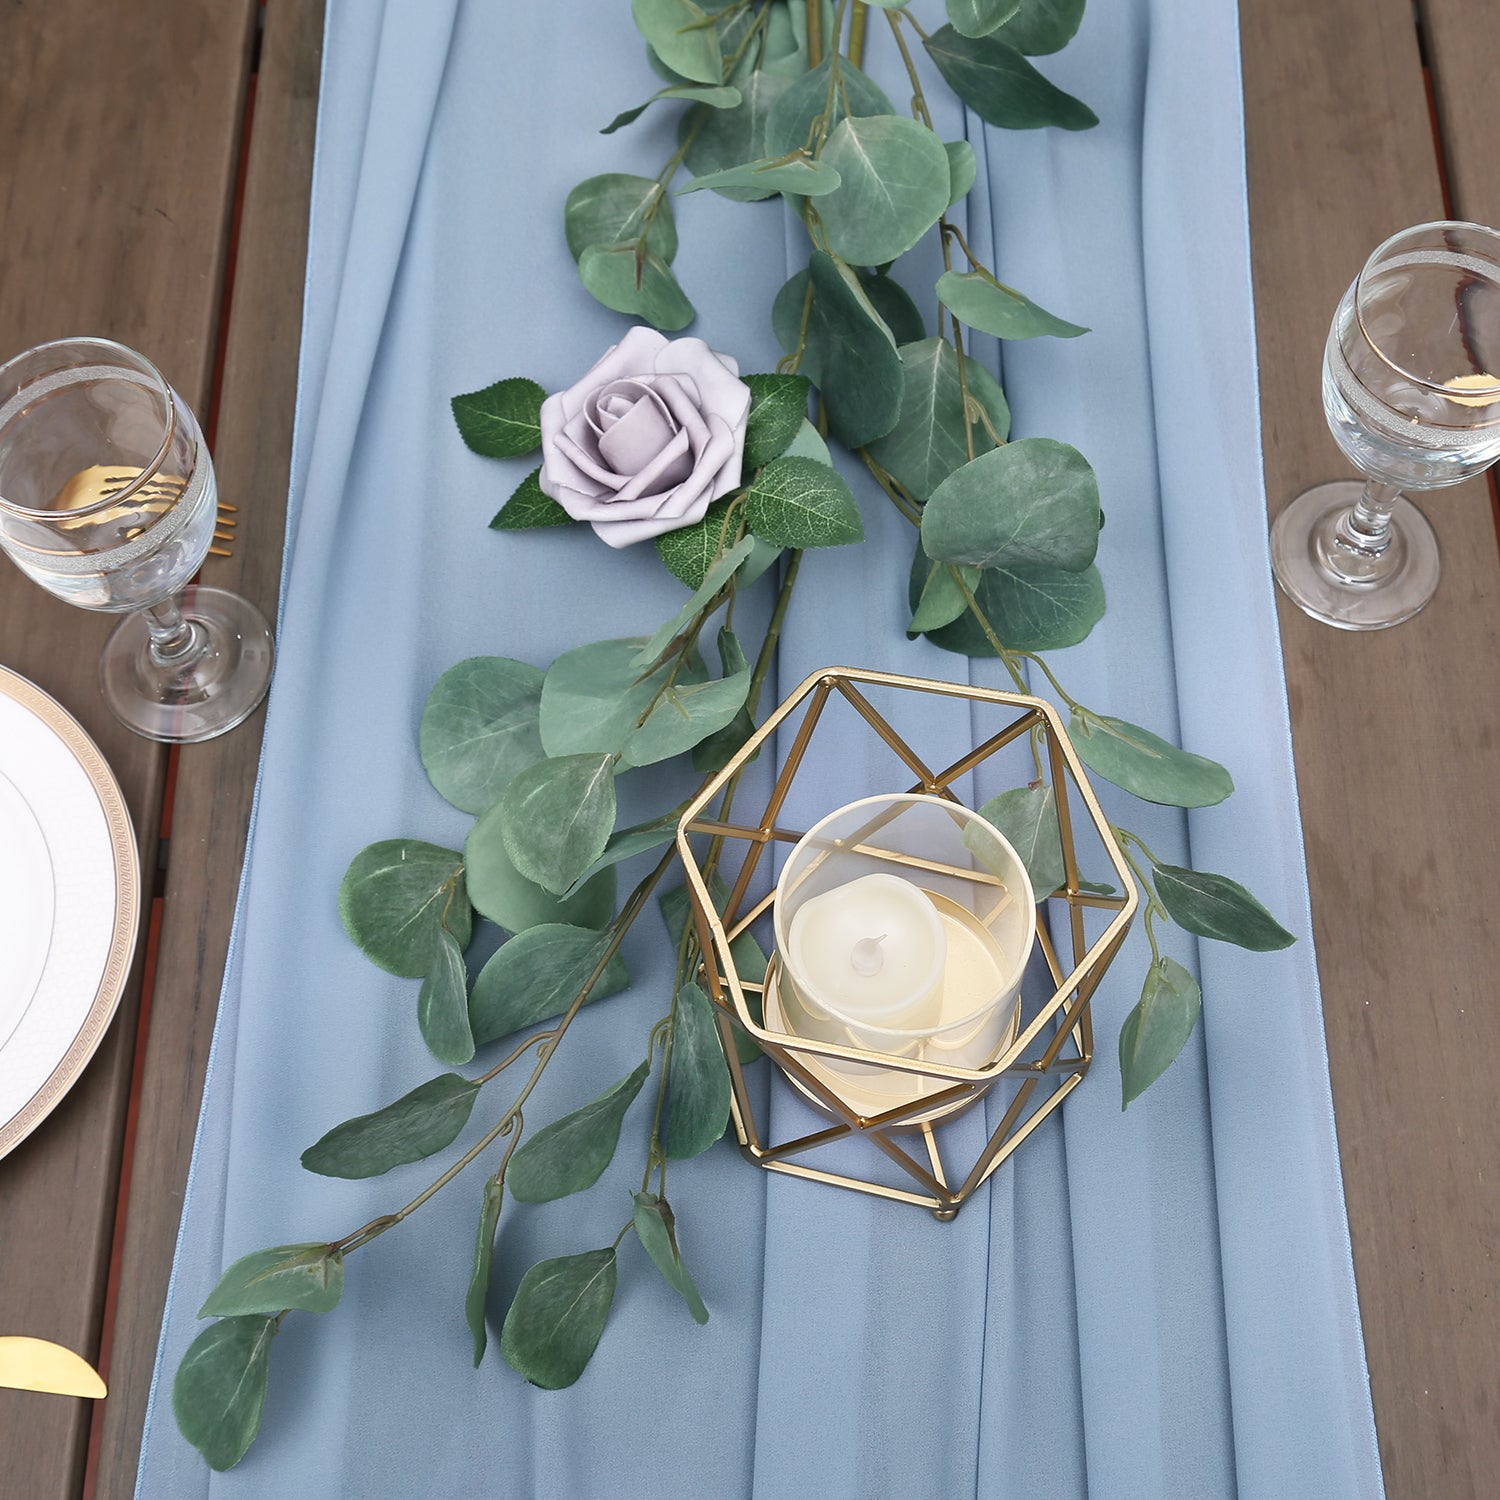 Doris Home 1pc 27x120inches 10ft Dusty Blue Chiffon Table Runner Tulle Extra Long Sheer Decoration With Ivory Ribbon For Romantic Wedding Reception Bridal Baby Shower Holiday Party - DorisHome